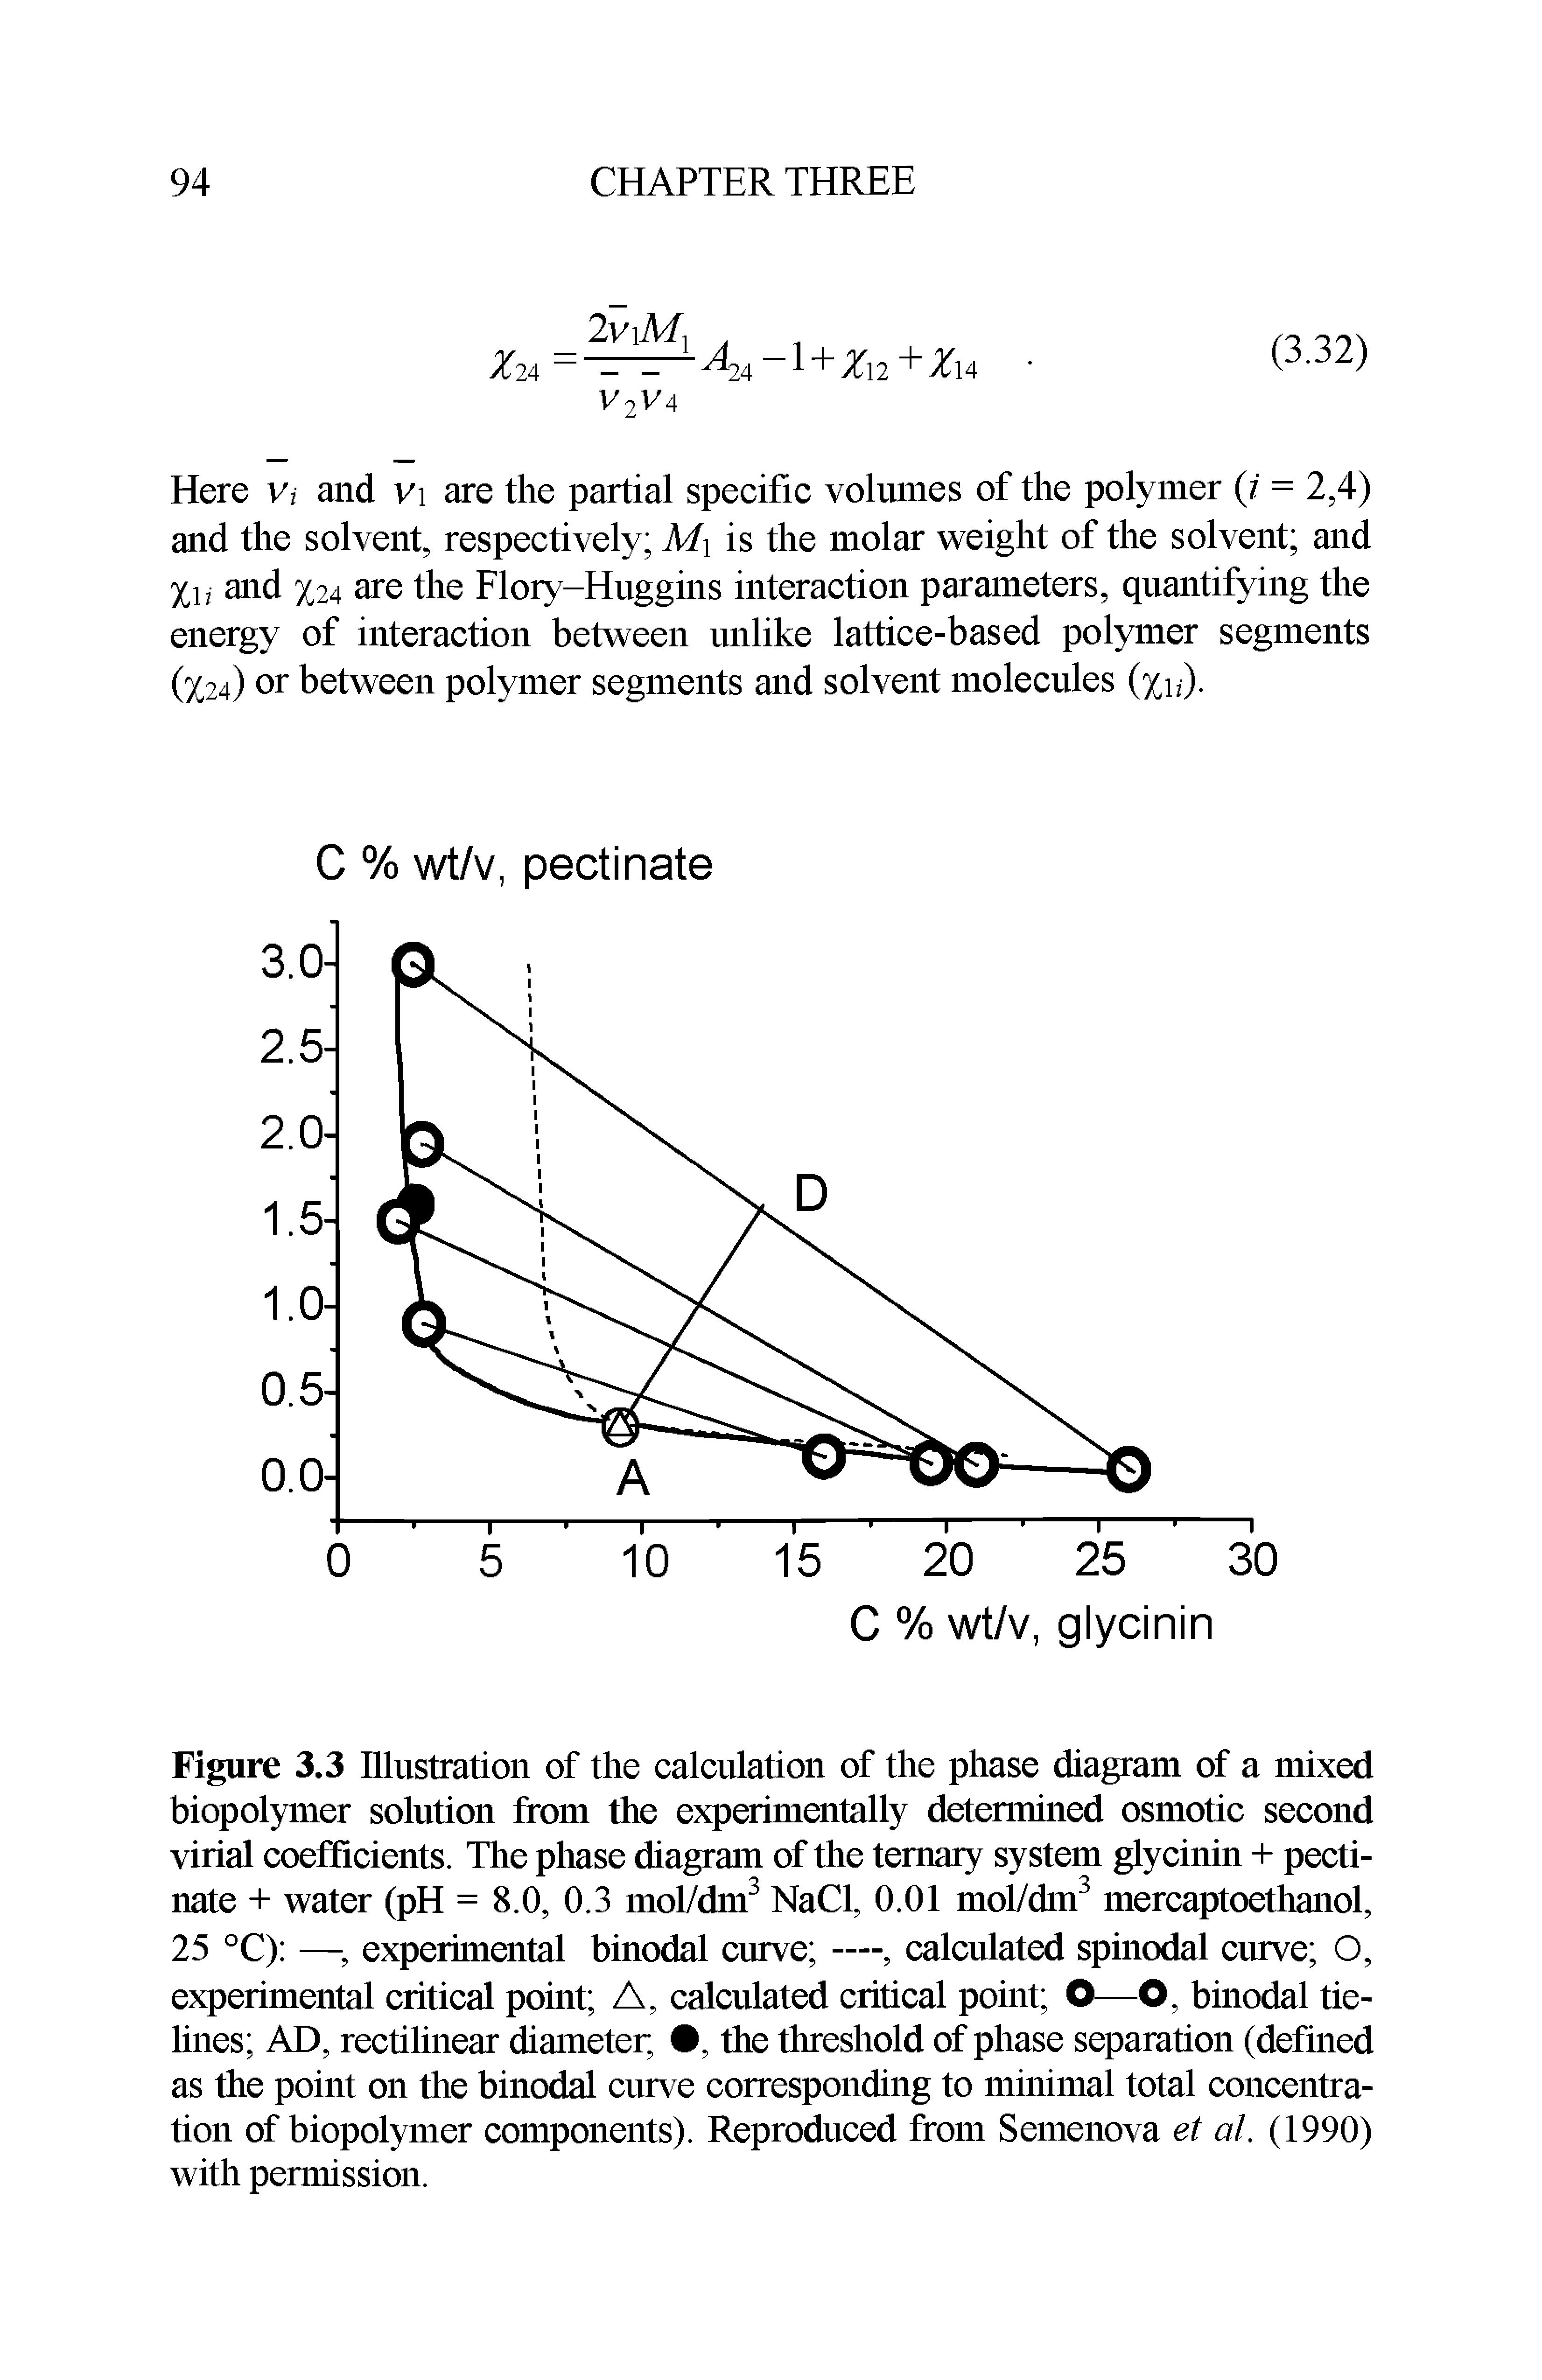 Figure 3.3 Illustration of the calculation of the phase diagram of a mixed biopolymer solution from the experimentally determined osmotic second virial coefficients. The phase diagram of the ternary system glycinin + pectinate + water (pH = 8.0, 0.3 mol/dm3 NaCl, 0.01 mol/dm3 mercaptoethanol, 25 °C) —, experimental binodal curve —, calculated spinodal curve O, experimental critical point A, calculated critical point O—O, binodal tielines AD, rectilinear diameter,, the threshold of phase separation (defined as the point on the binodal curve corresponding to minimal total concentration of biopolymer components). Reproduced from Semenova et al. (1990) with permission.